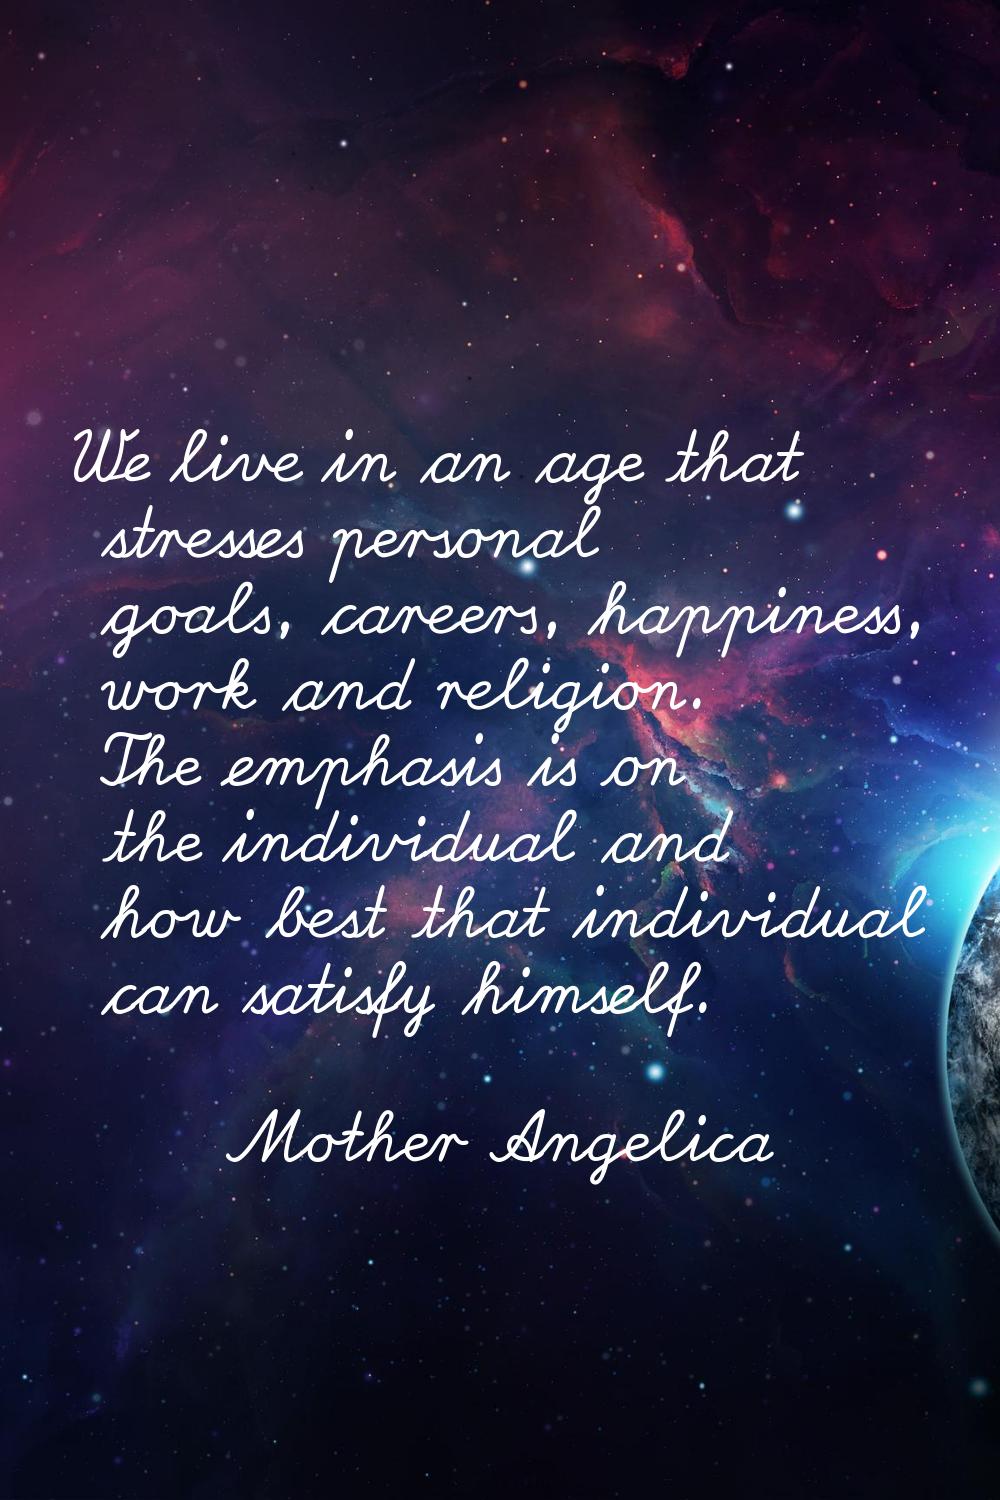 We live in an age that stresses personal goals, careers, happiness, work and religion. The emphasis